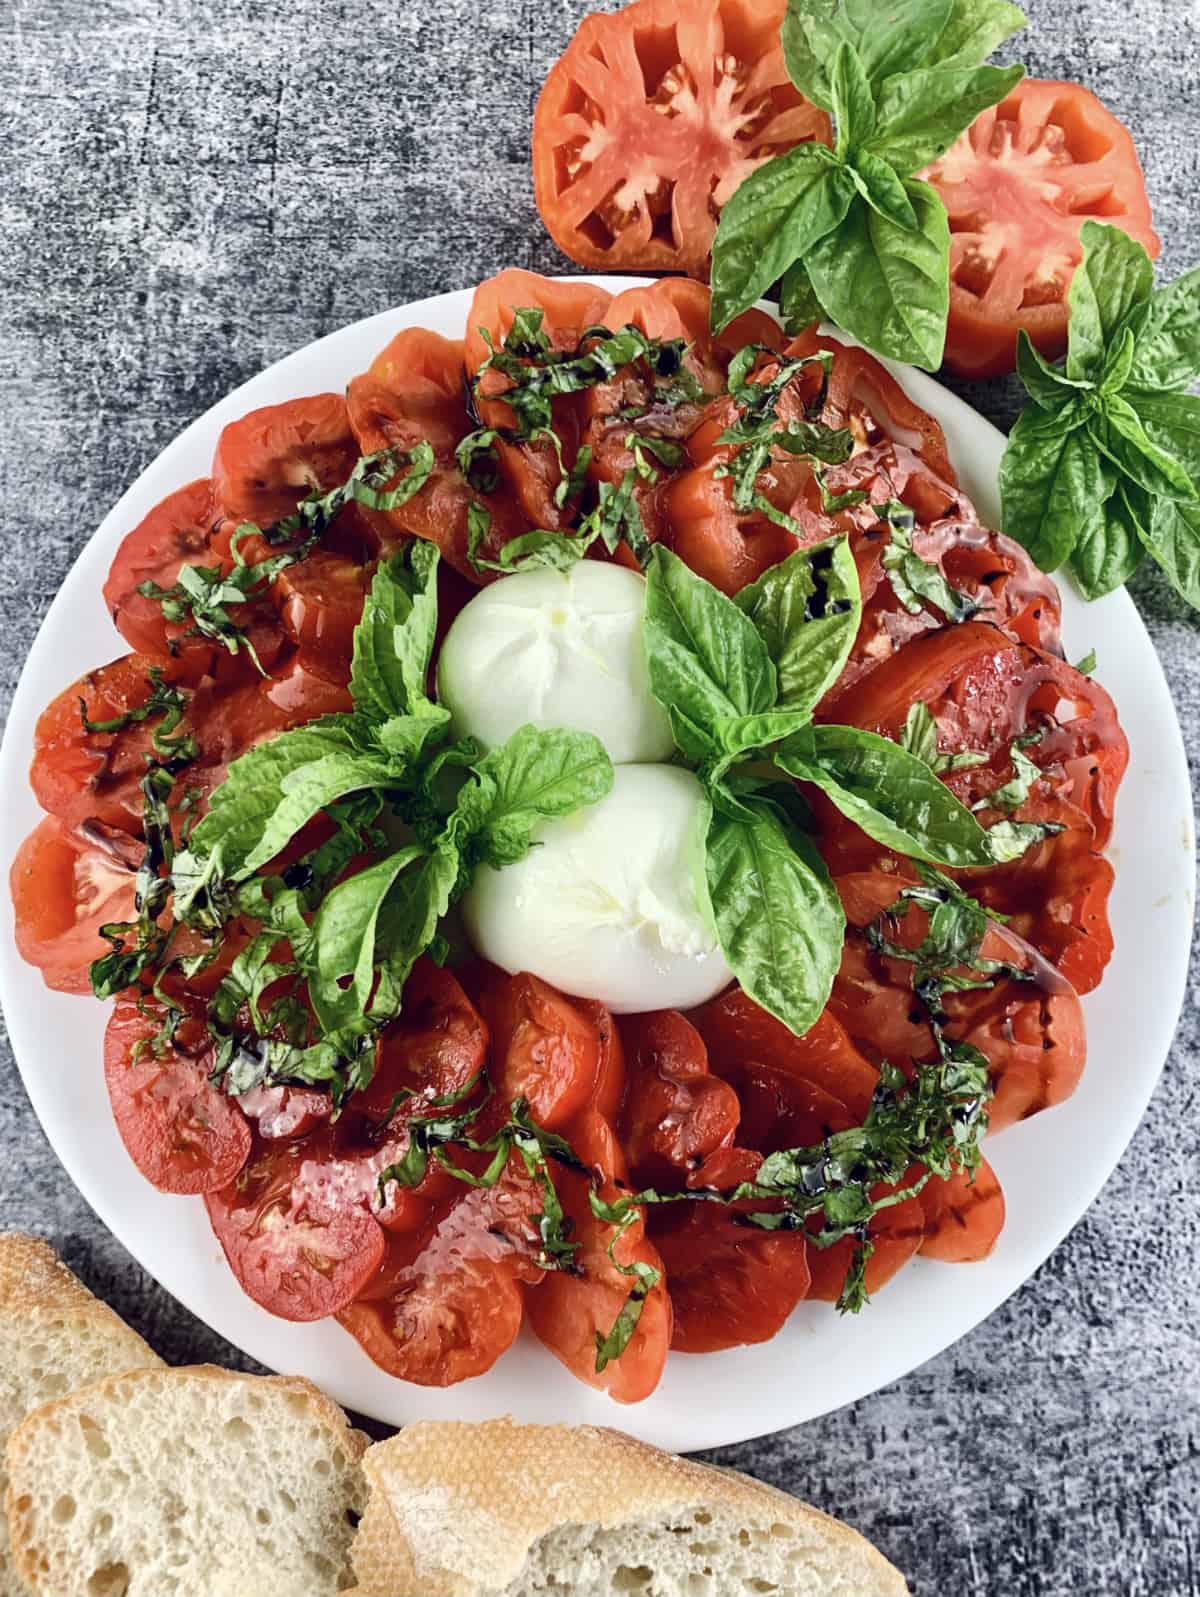 Burrata caprese salad with sliced tomatoes, bresh bread and basil sprigs on the side.